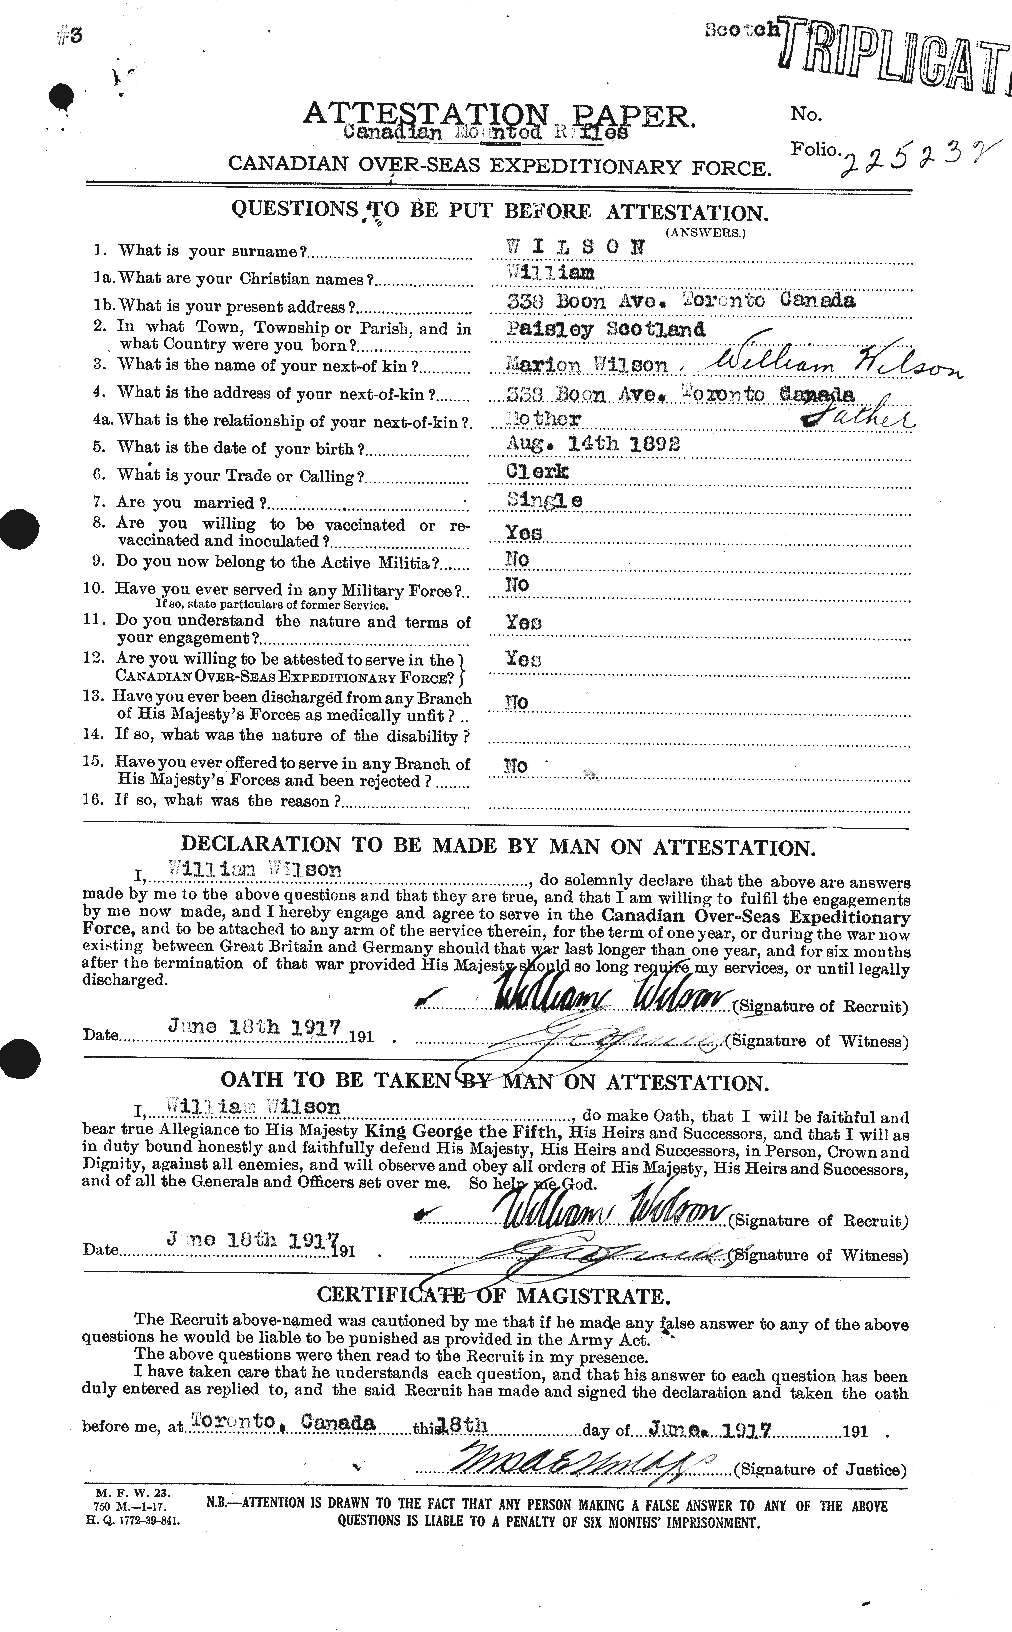 Personnel Records of the First World War - CEF 681888a